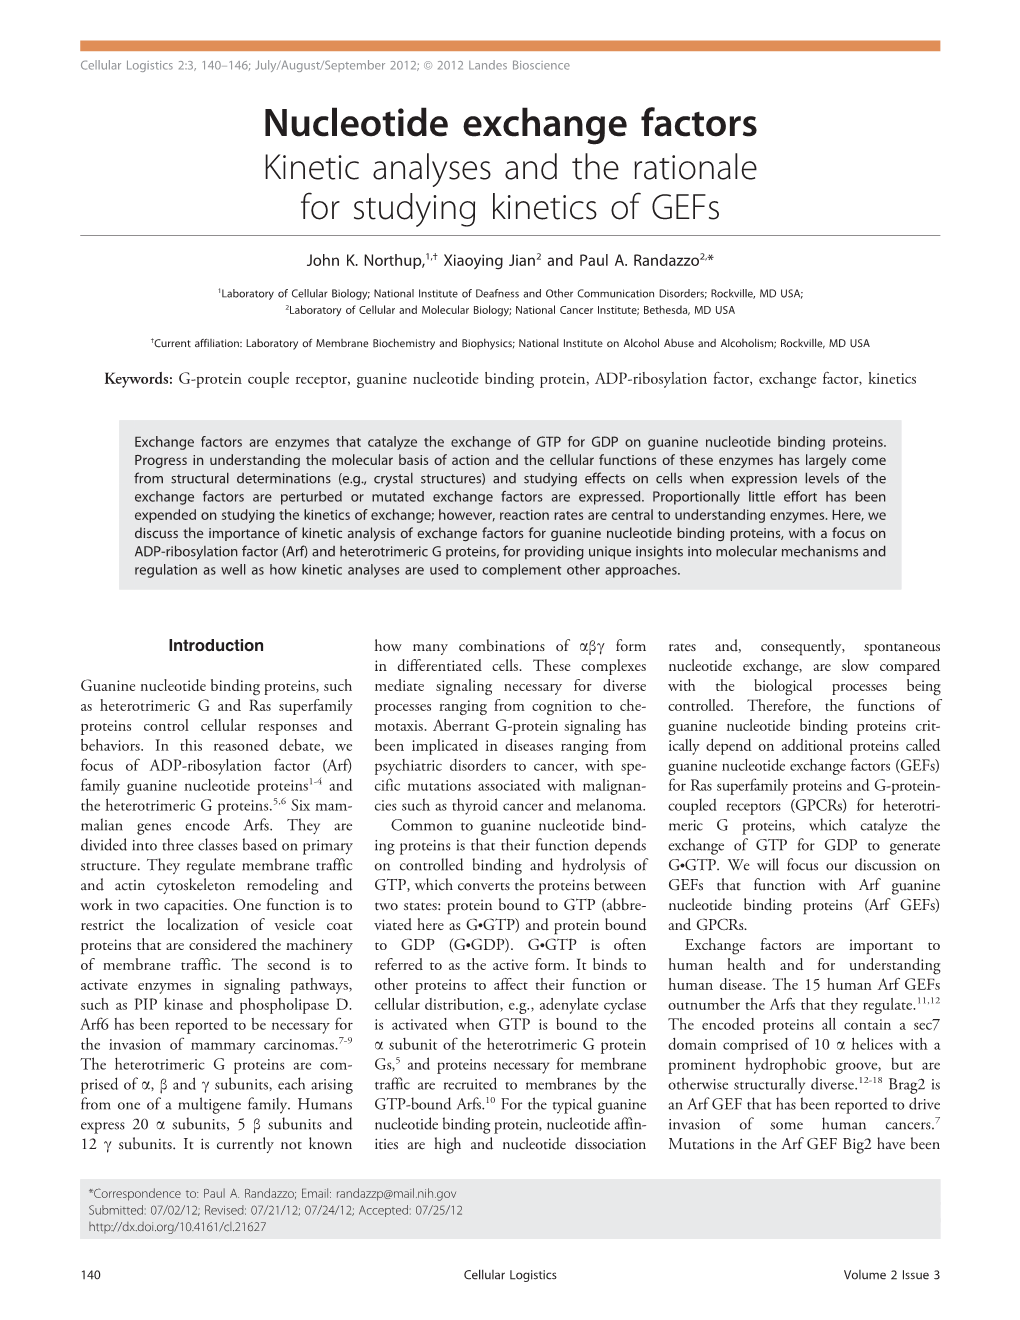 Nucleotide Exchange Factors Kinetic Analyses and the Rationale for Studying Kinetics of Gefs